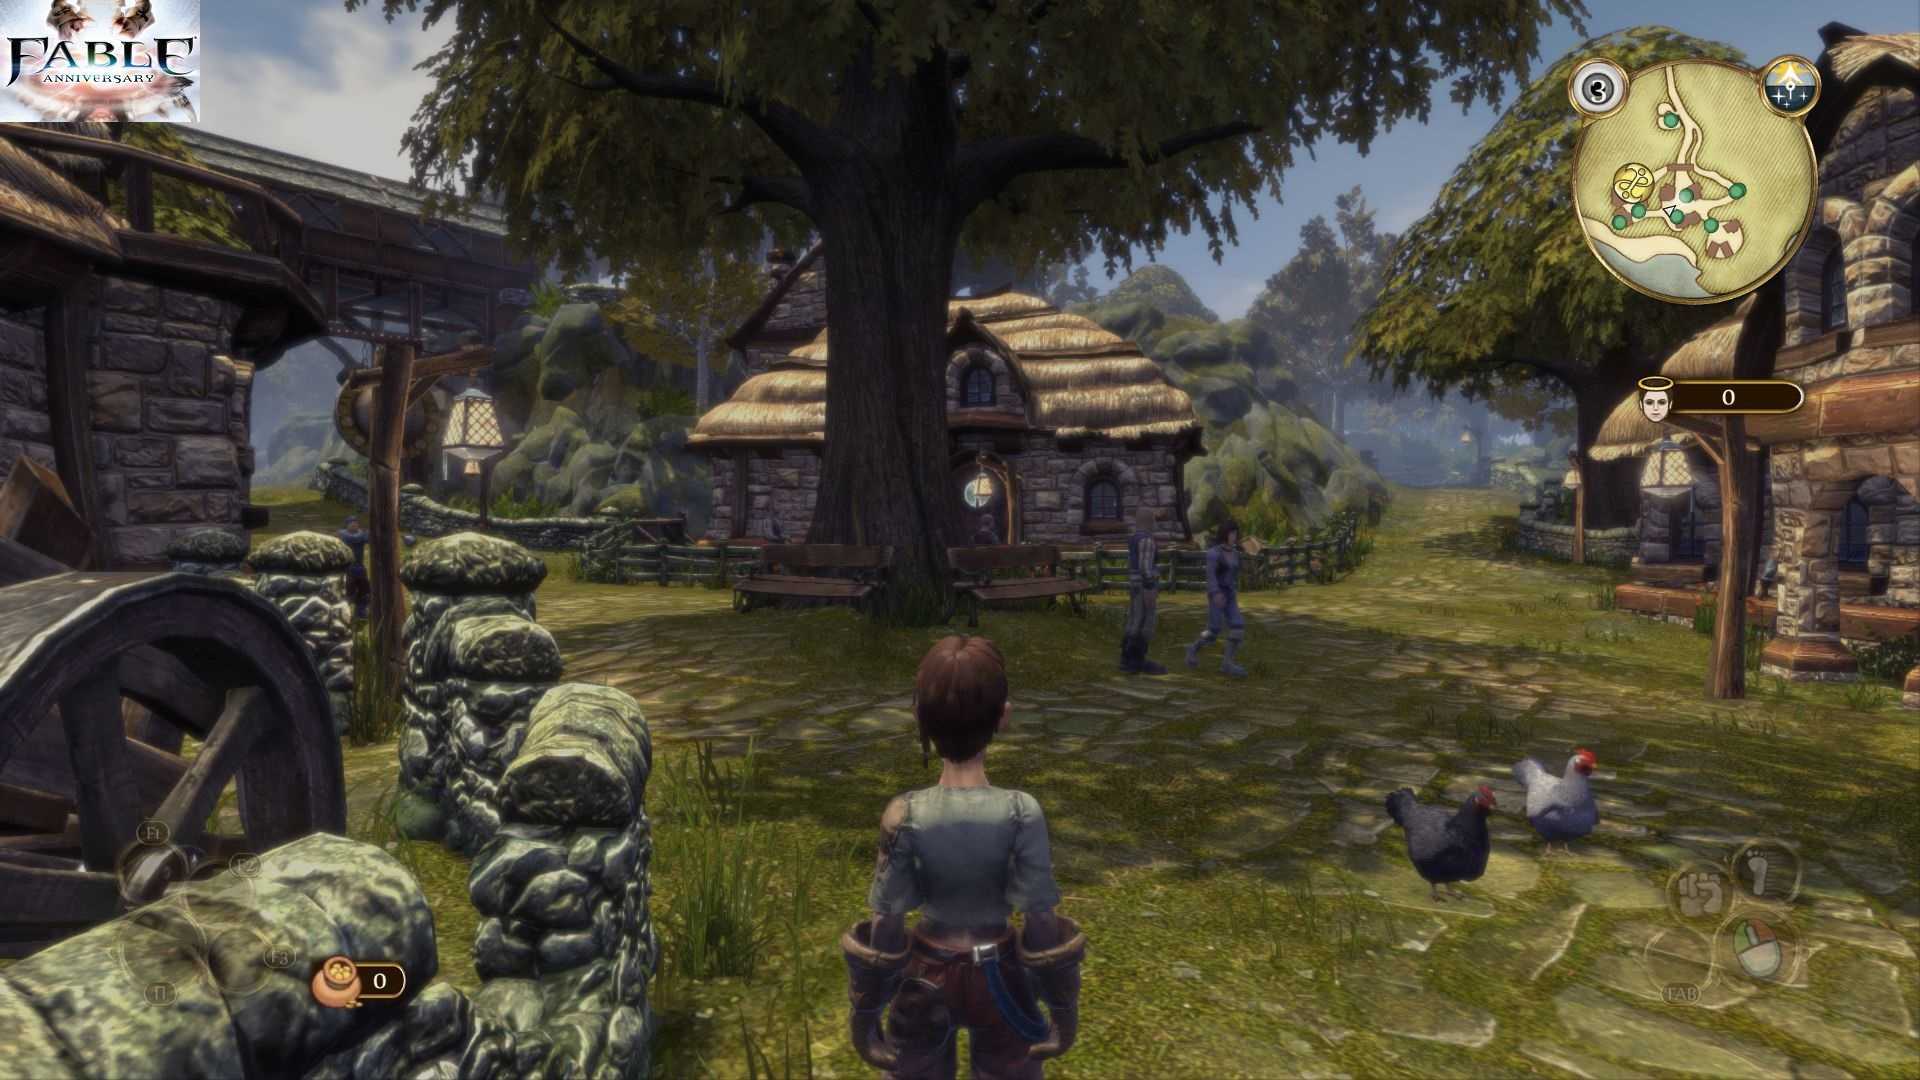 Fable cottage. Фэйбл эниверсари. Fable 2 Anniversary. Fable II Gameplay. Fable 2 ремастер.